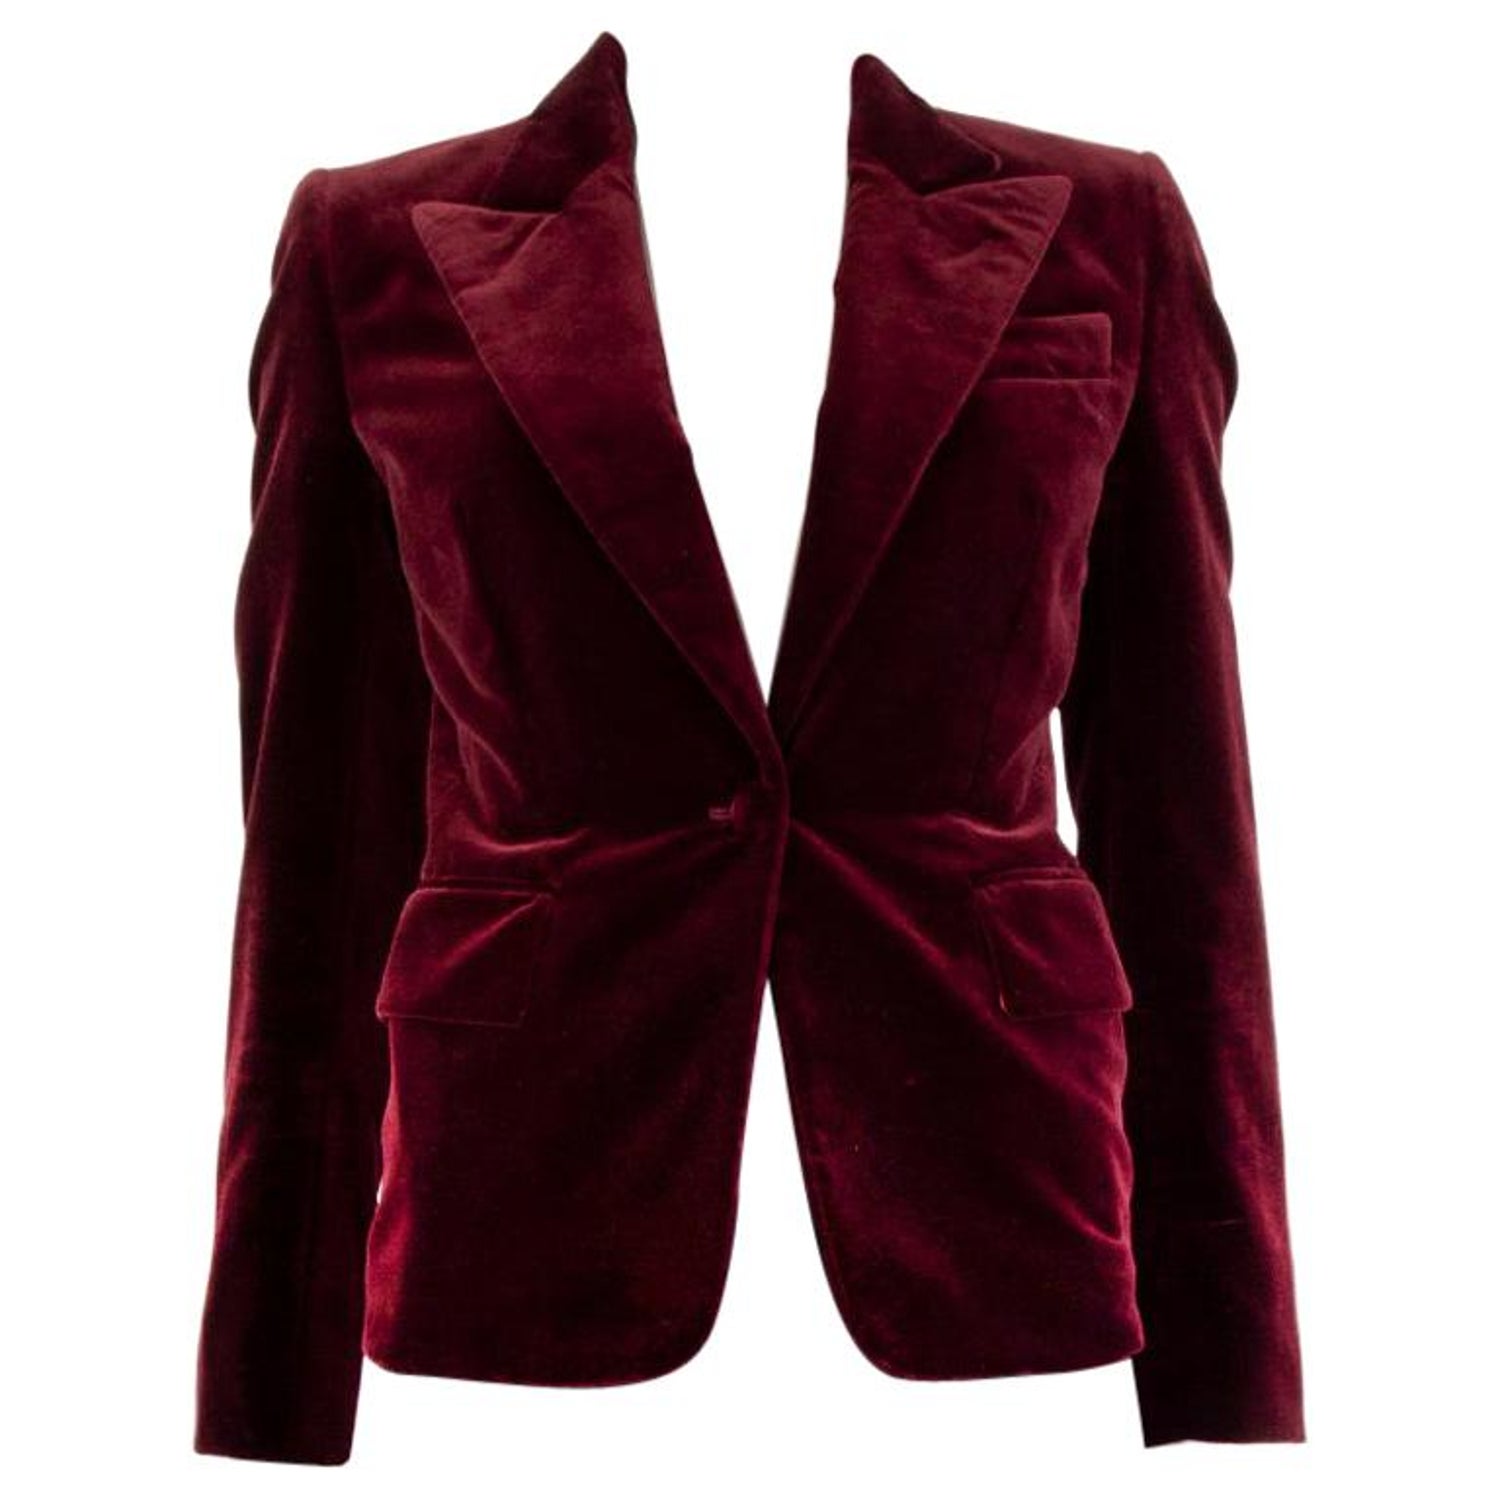 Tom Ford Remakes That Iconic '90s Red Velvet Suit | vlr.eng.br